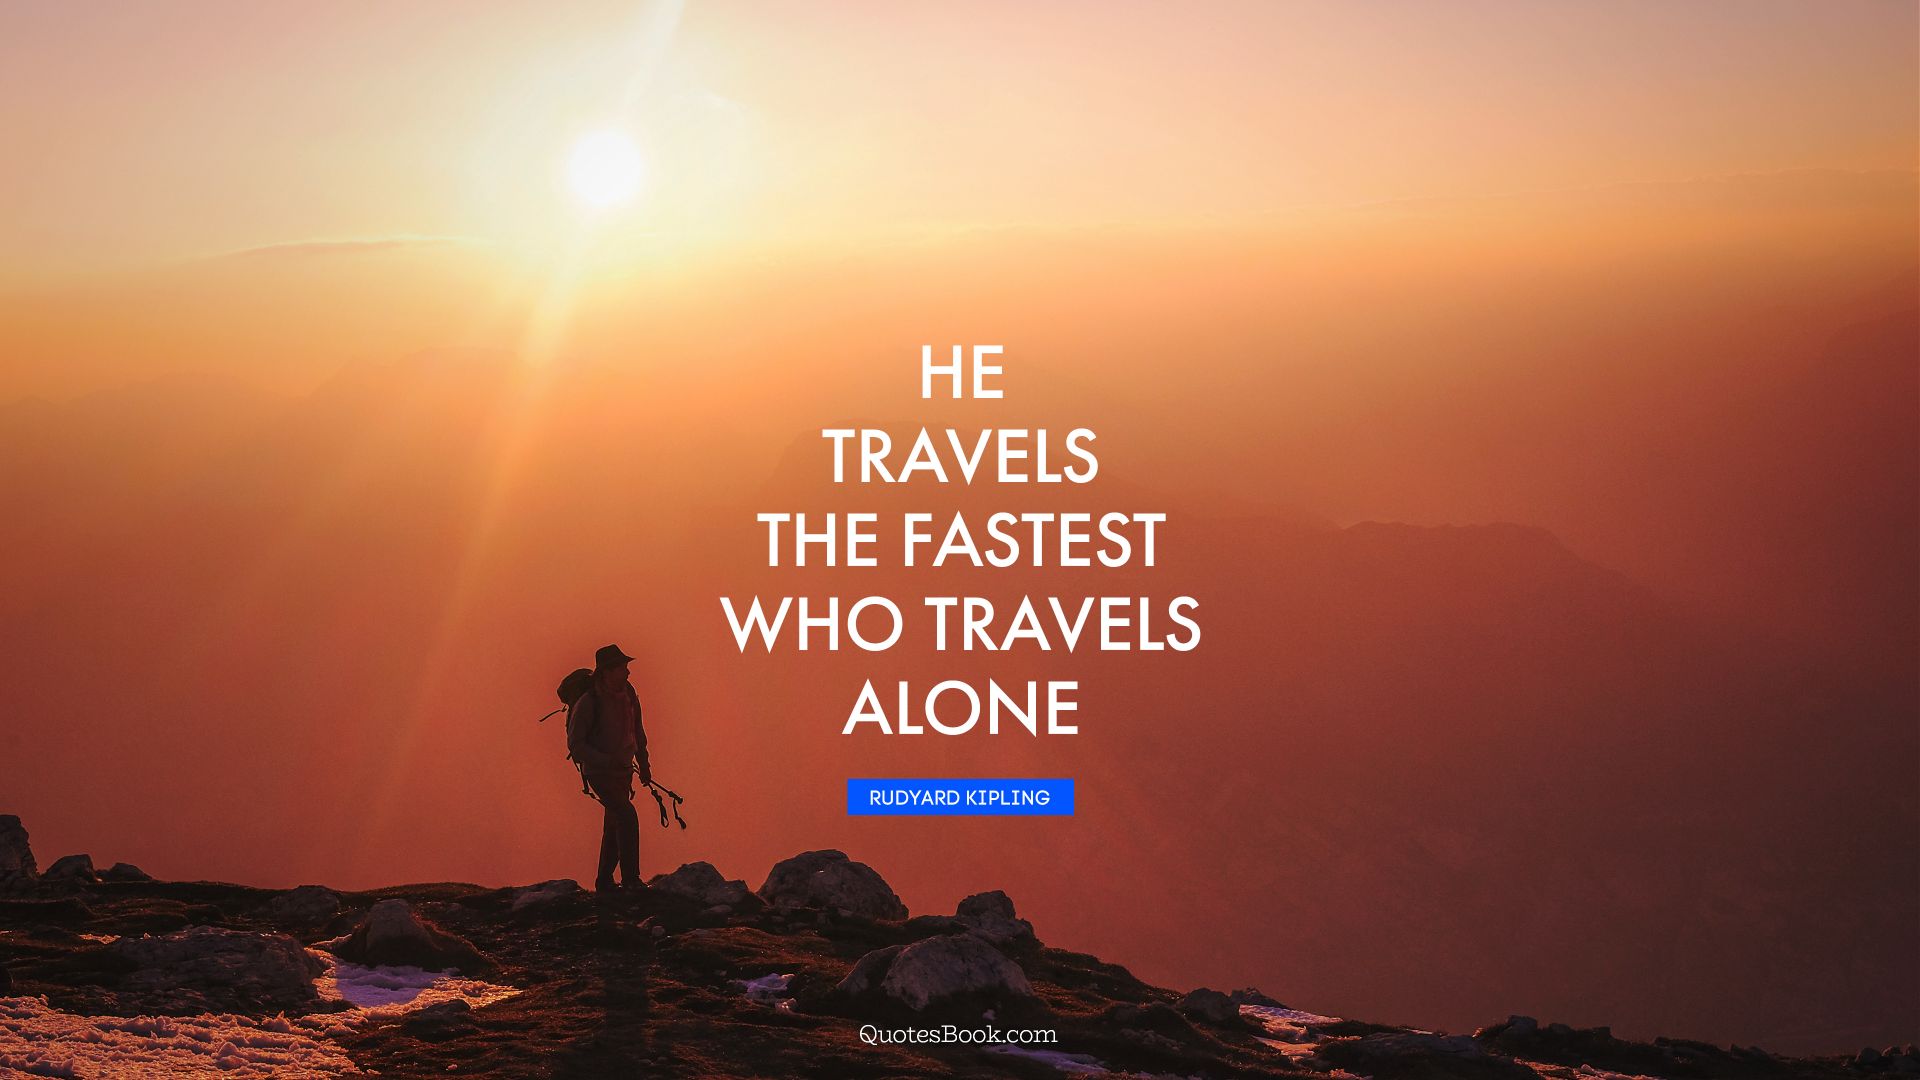 He travels the fastest who travels alone. - Quote by Rudyard Kipling